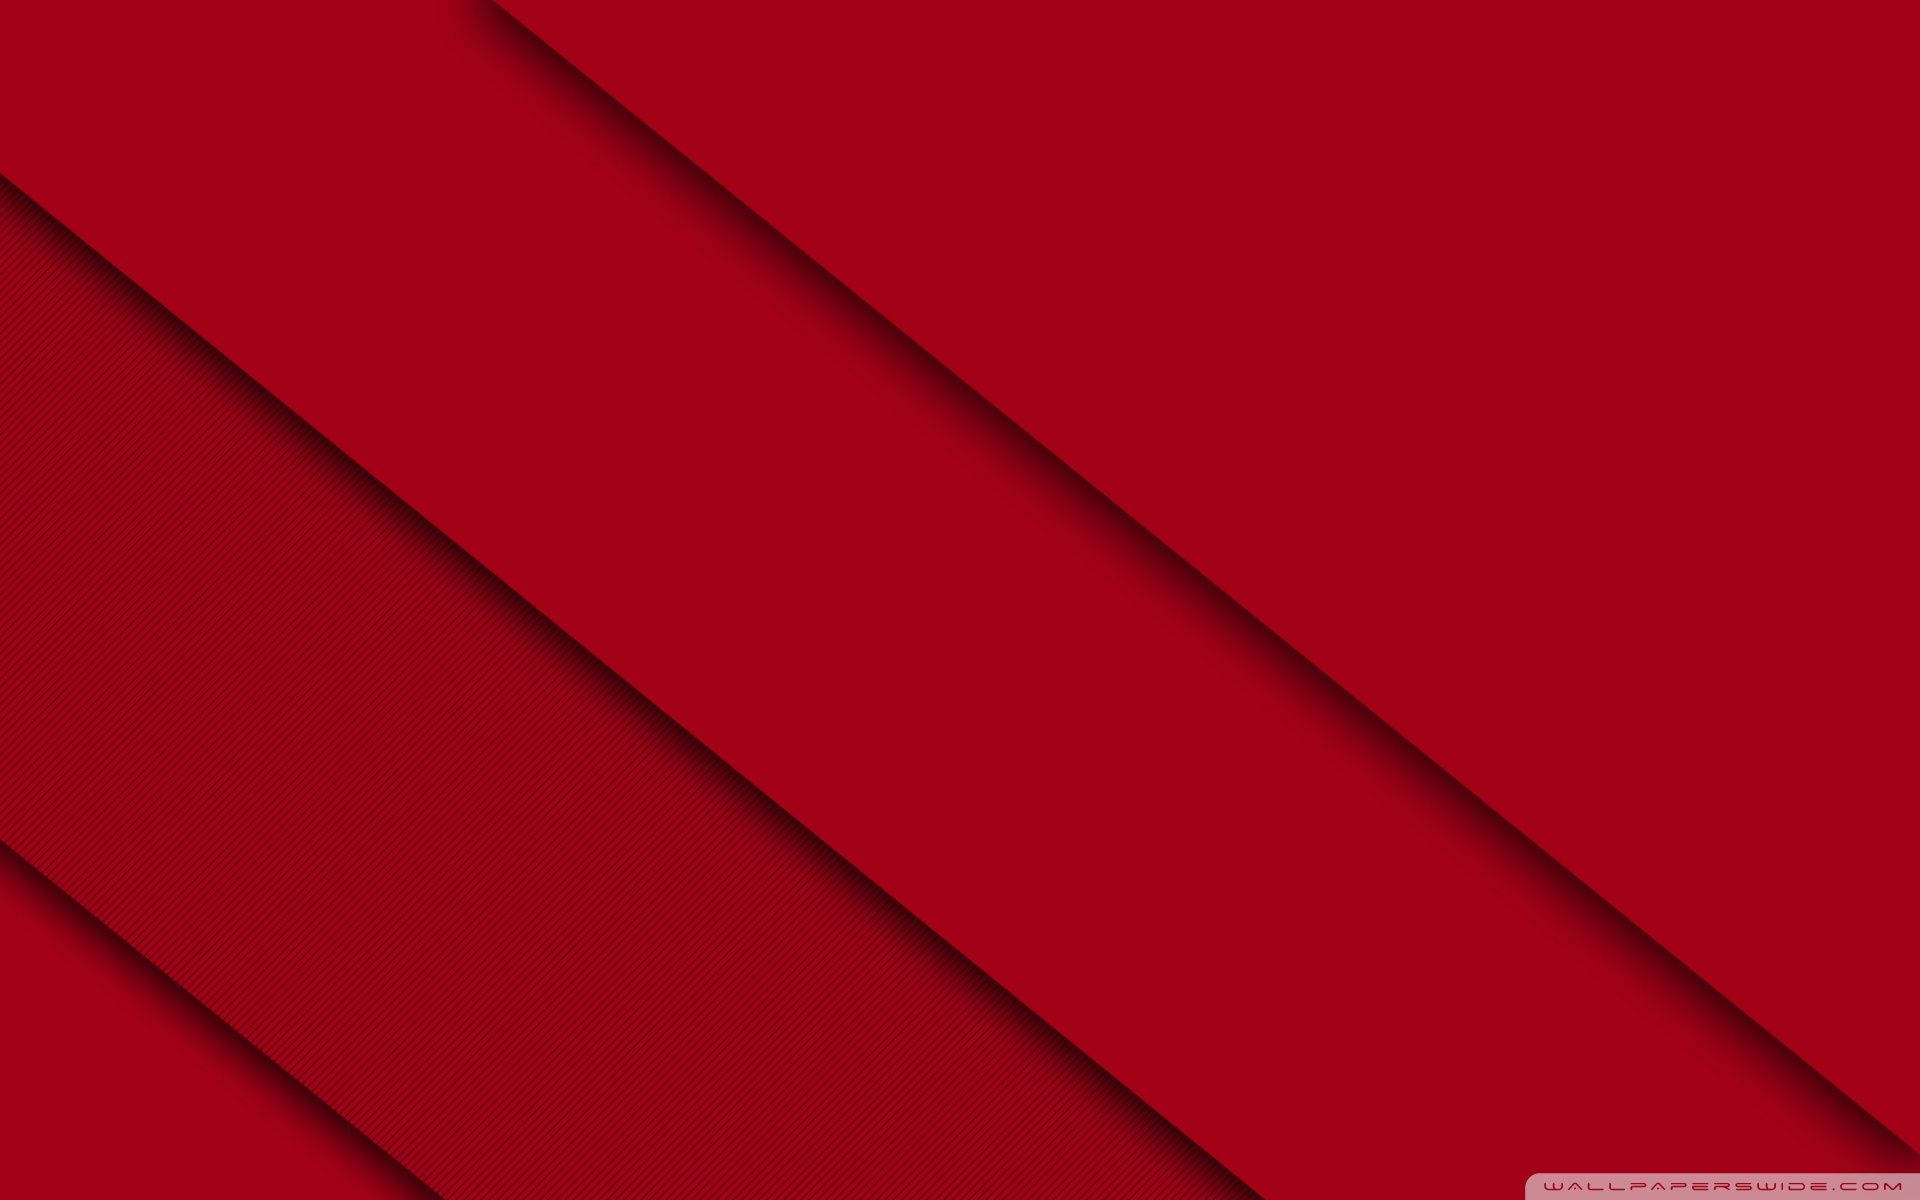 Energetic Red Lines Background Wallpaper